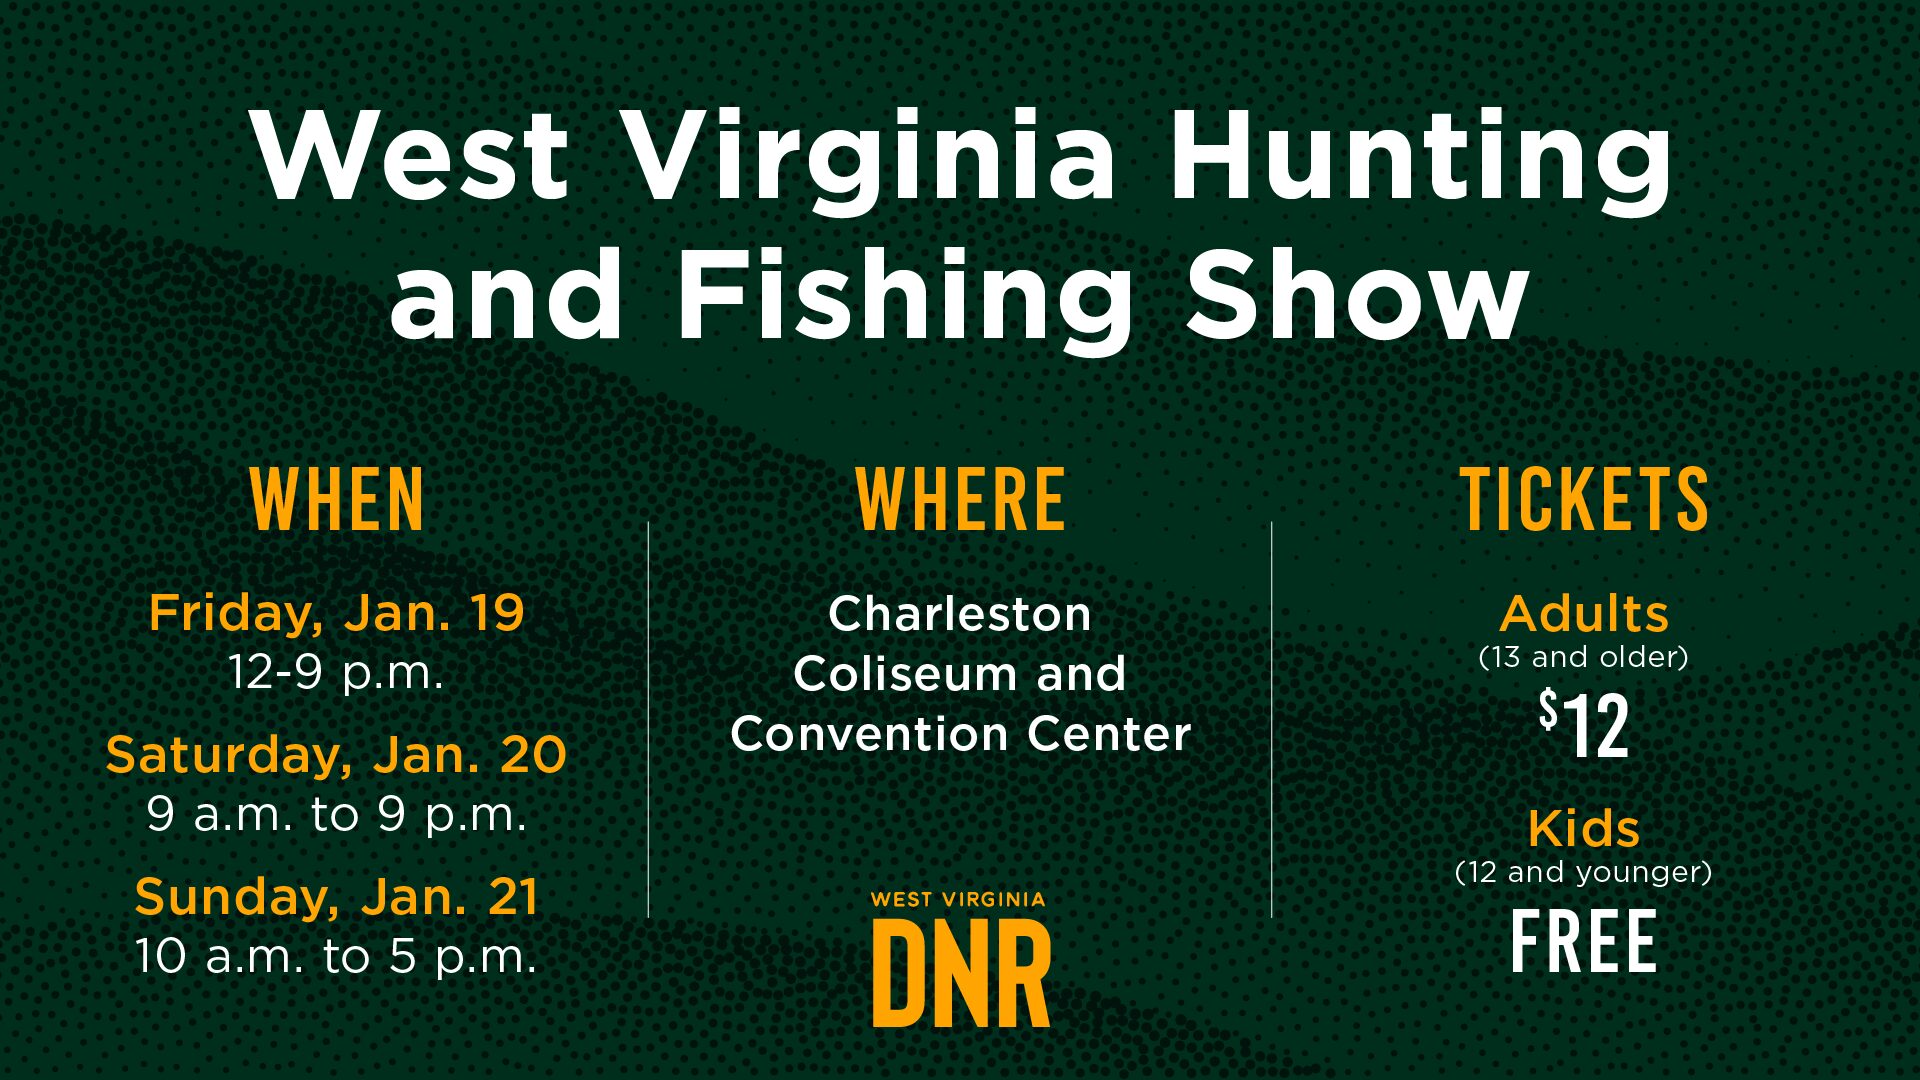 Justice Government announces that the WVDNR is sponsoring the 36th Annual West Virginia Hunting and Fishing Expo